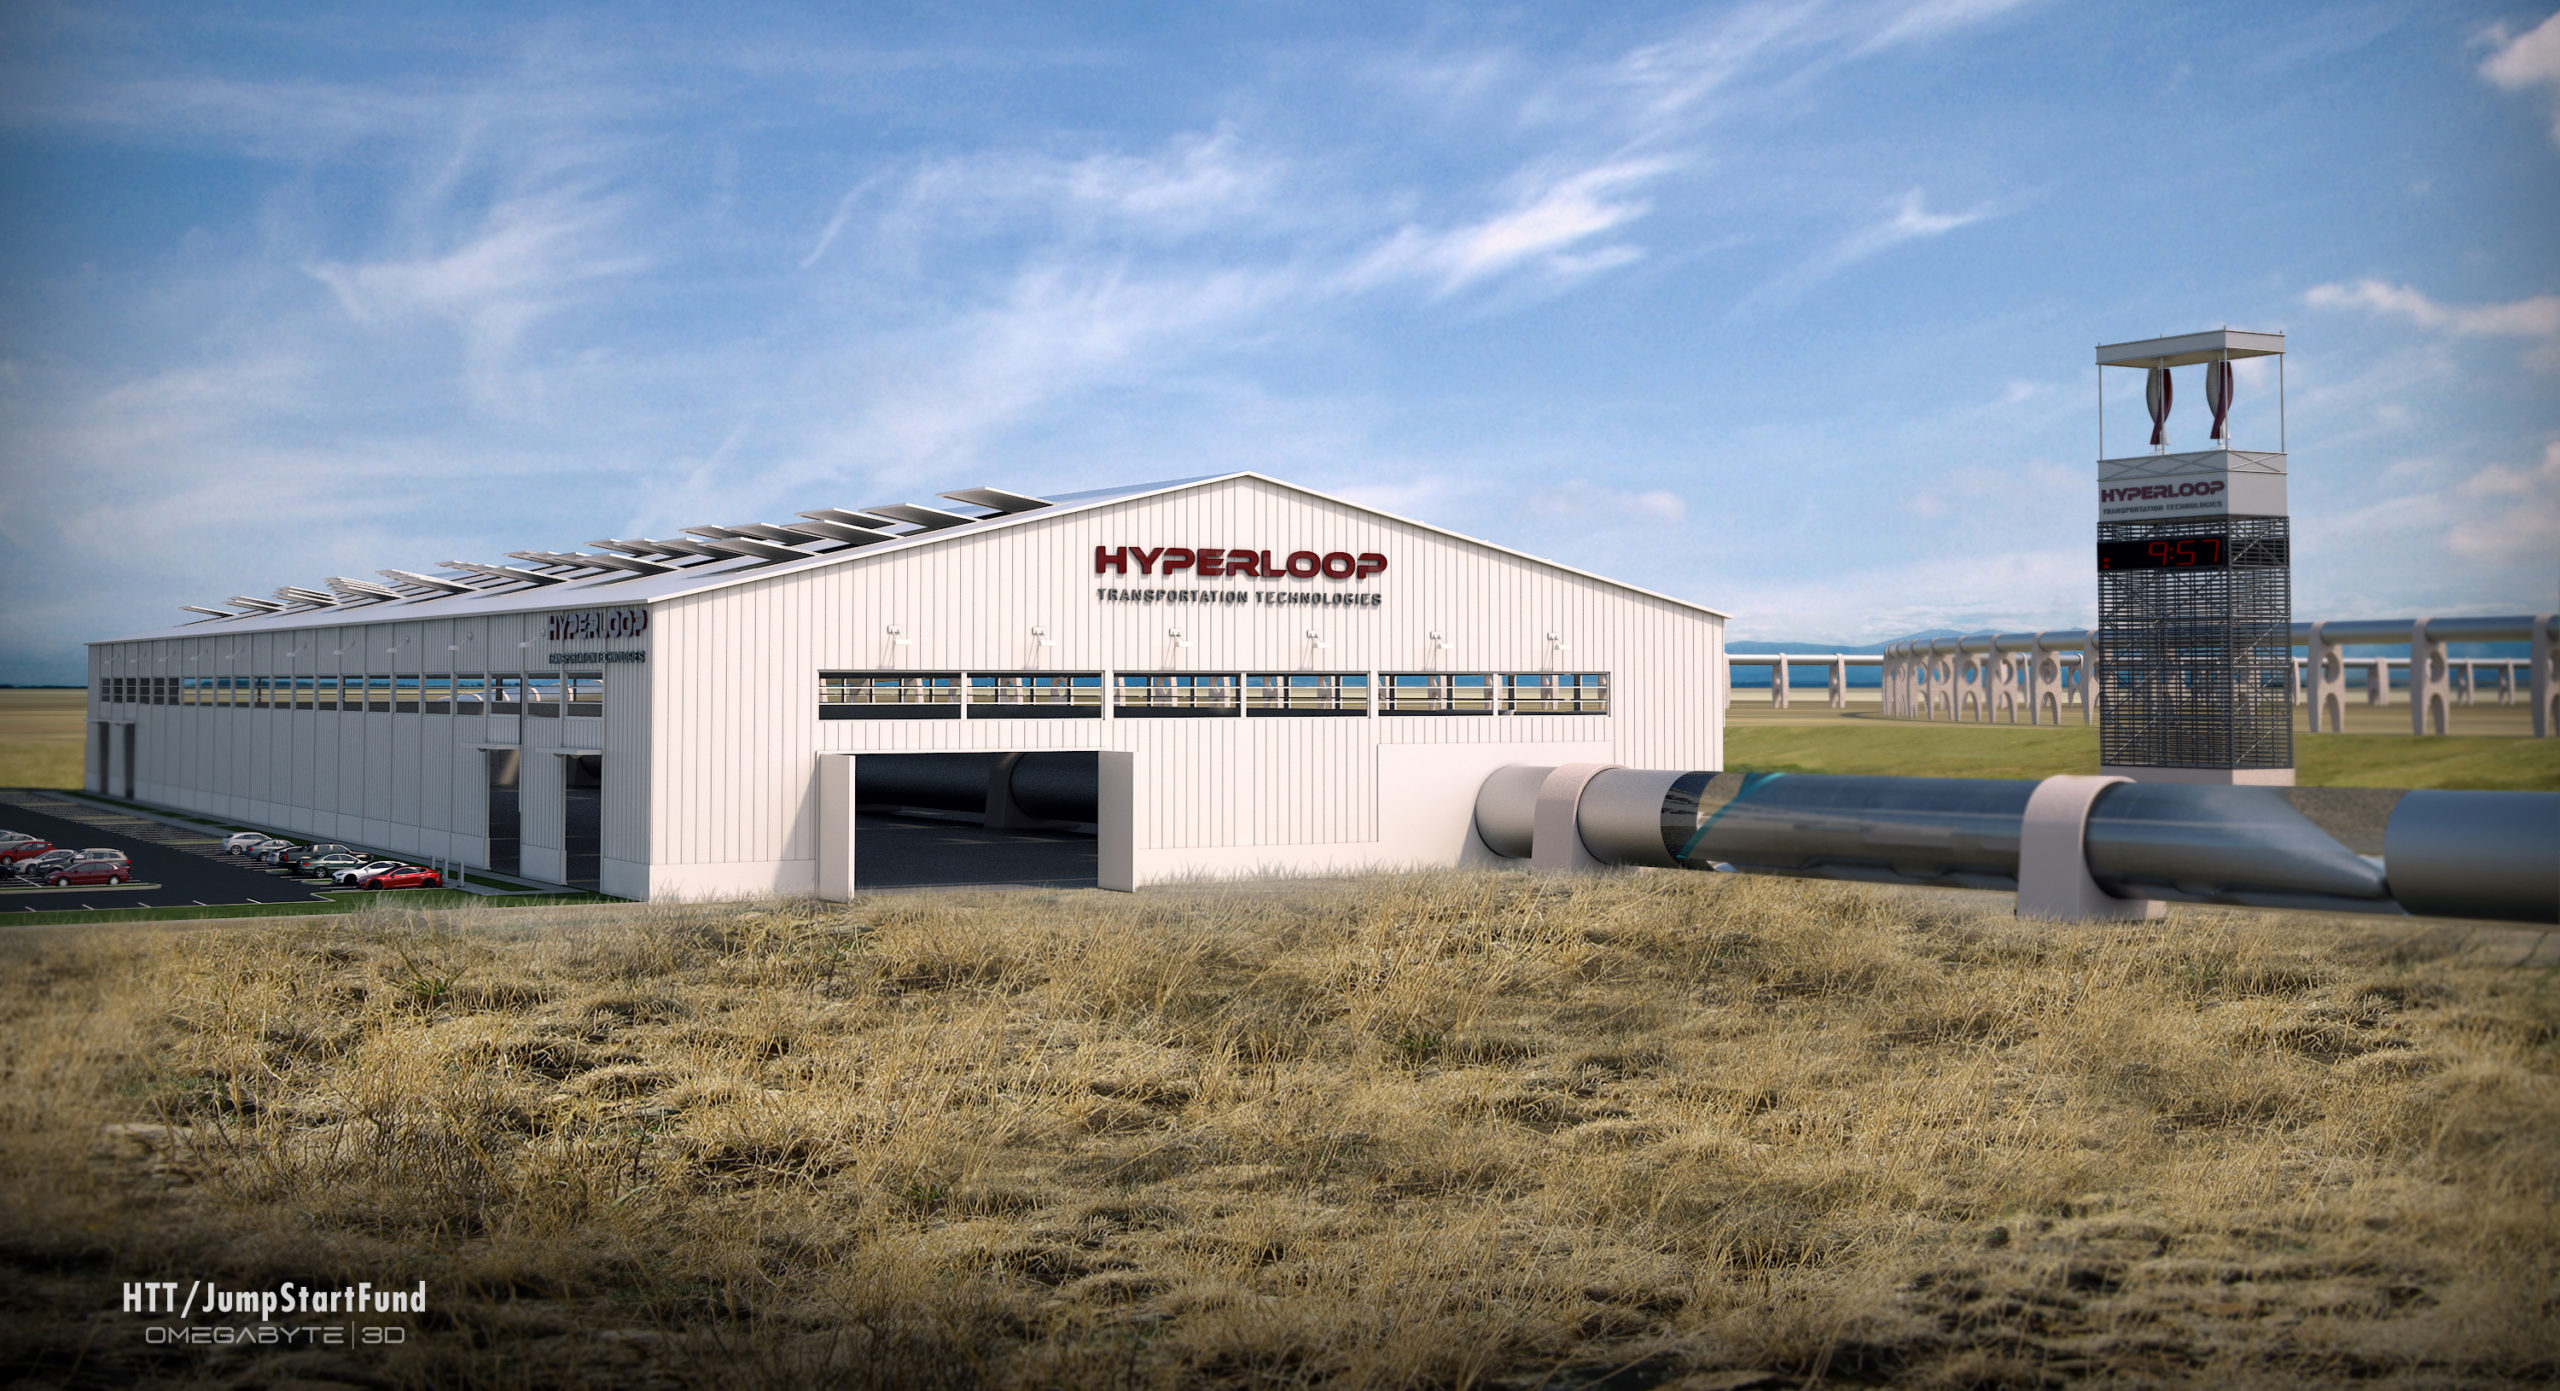 Welcome To The Rural Model Town That Wants To Build A Hyperloop Utopia